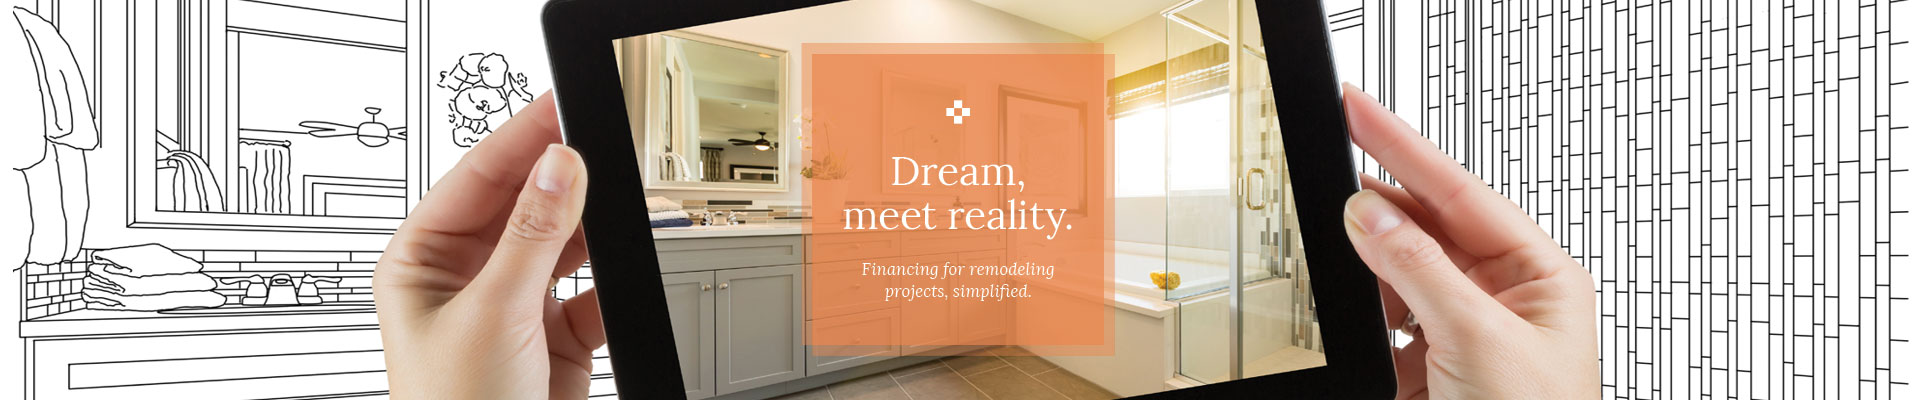 Financing for remodeling project simplified! Dream, meet reality.